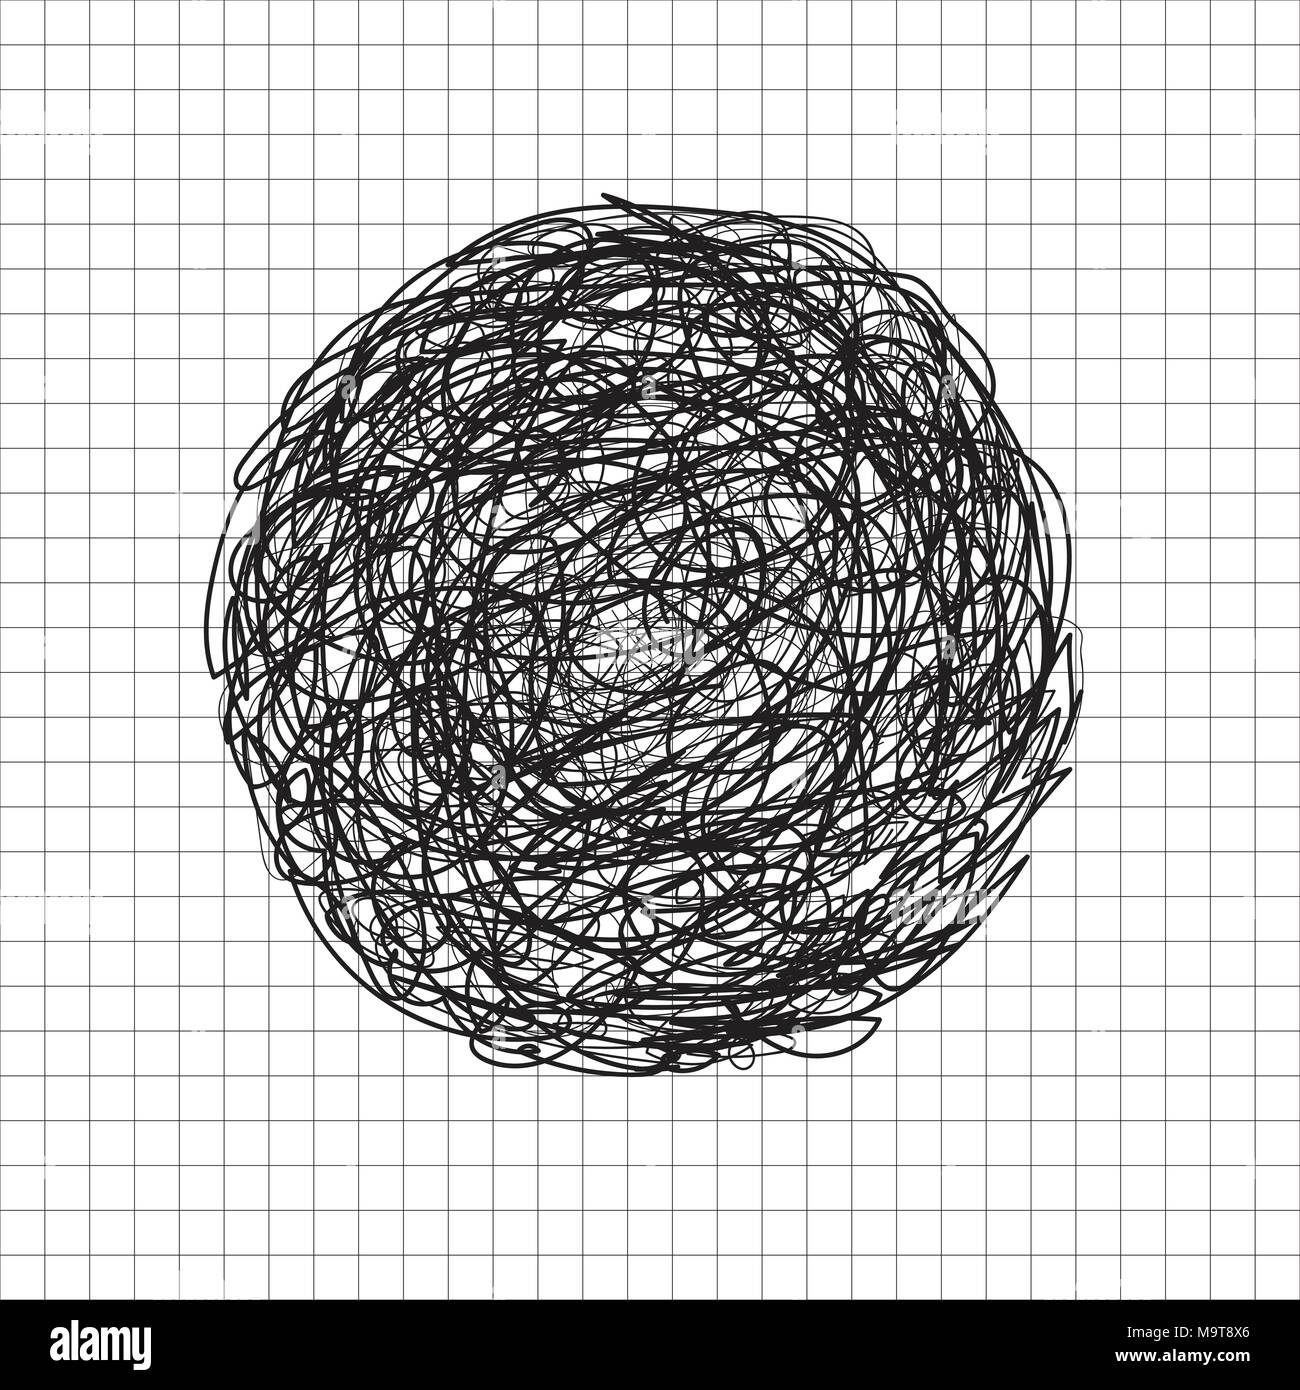 Abstract hand drawn scrawl sketch black color circle tangle, scribble, doodle on grid white background. Vector illustration Stock Vector